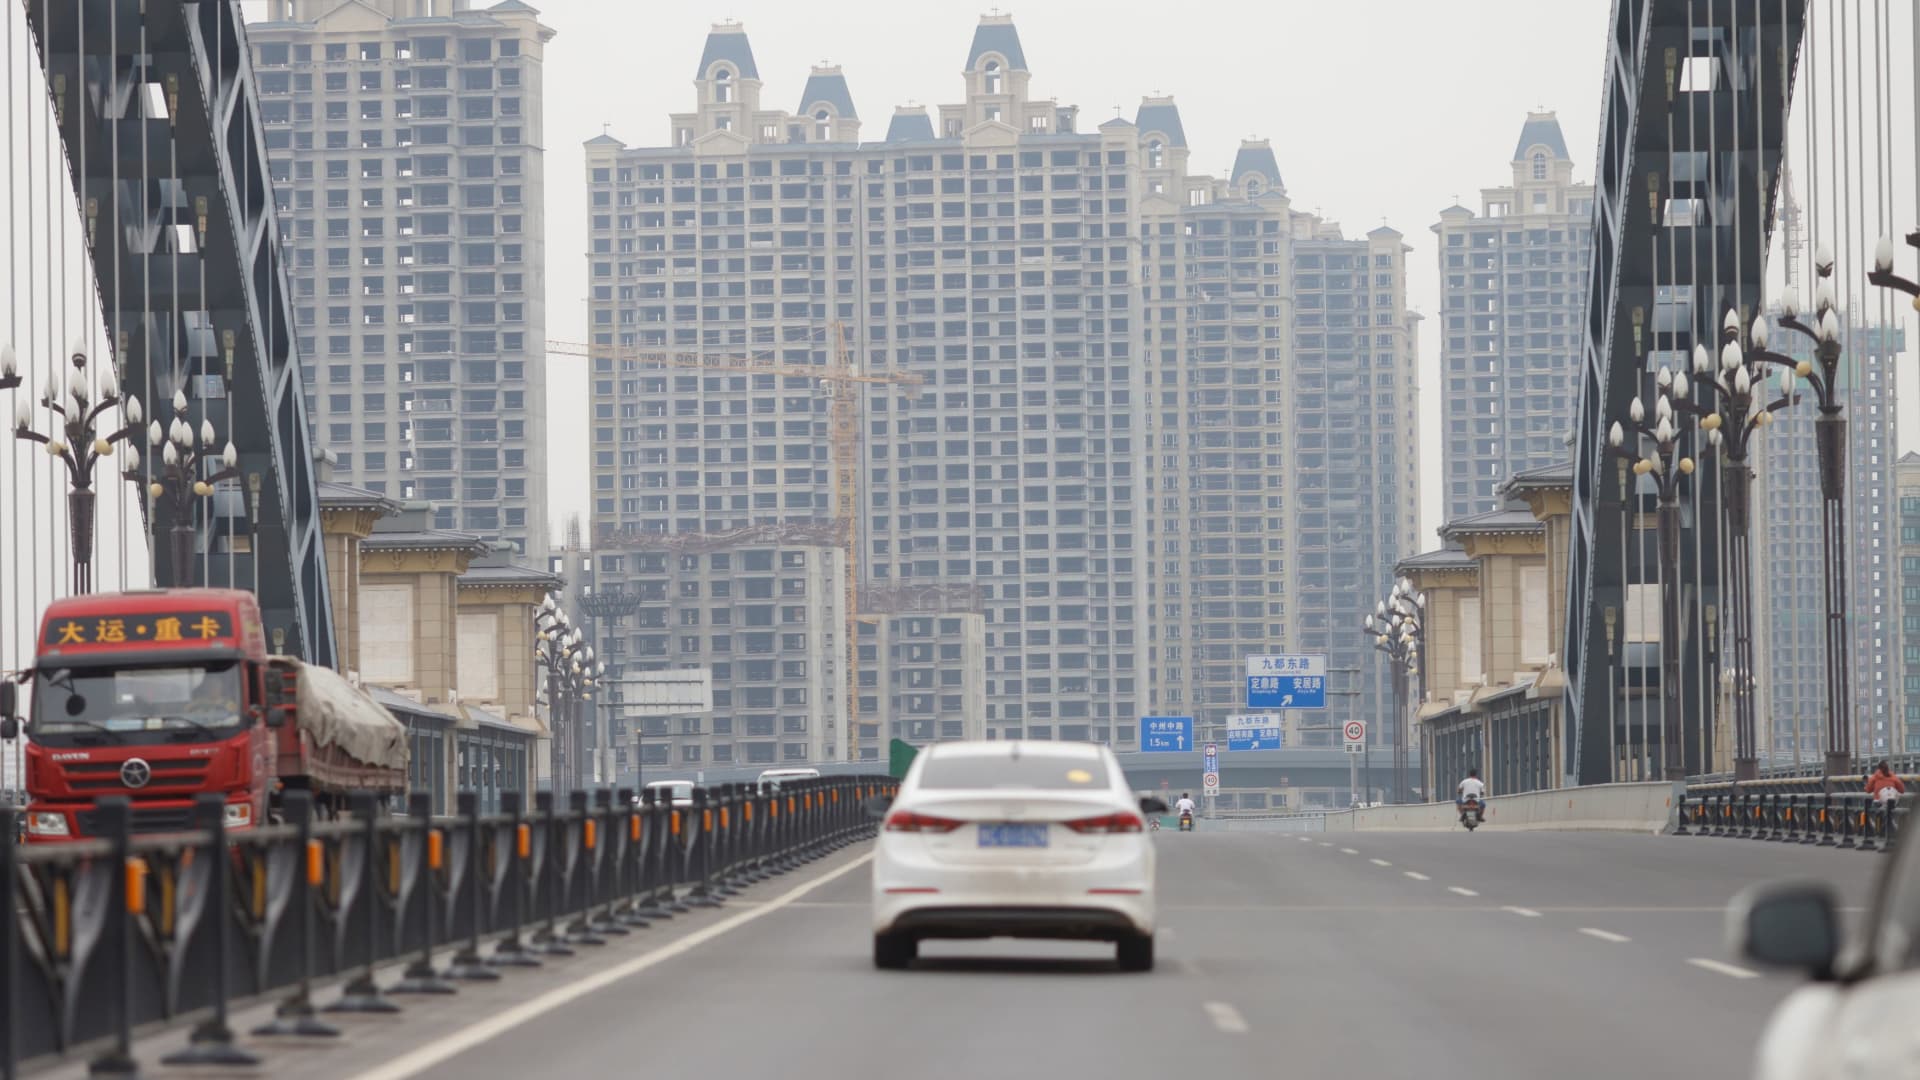 Vehicles drive near unfinished residential buildings from the Evergrande Oasis, a housing complex developed by Evergrande Group, in Luoyang, China September 16, 2021.